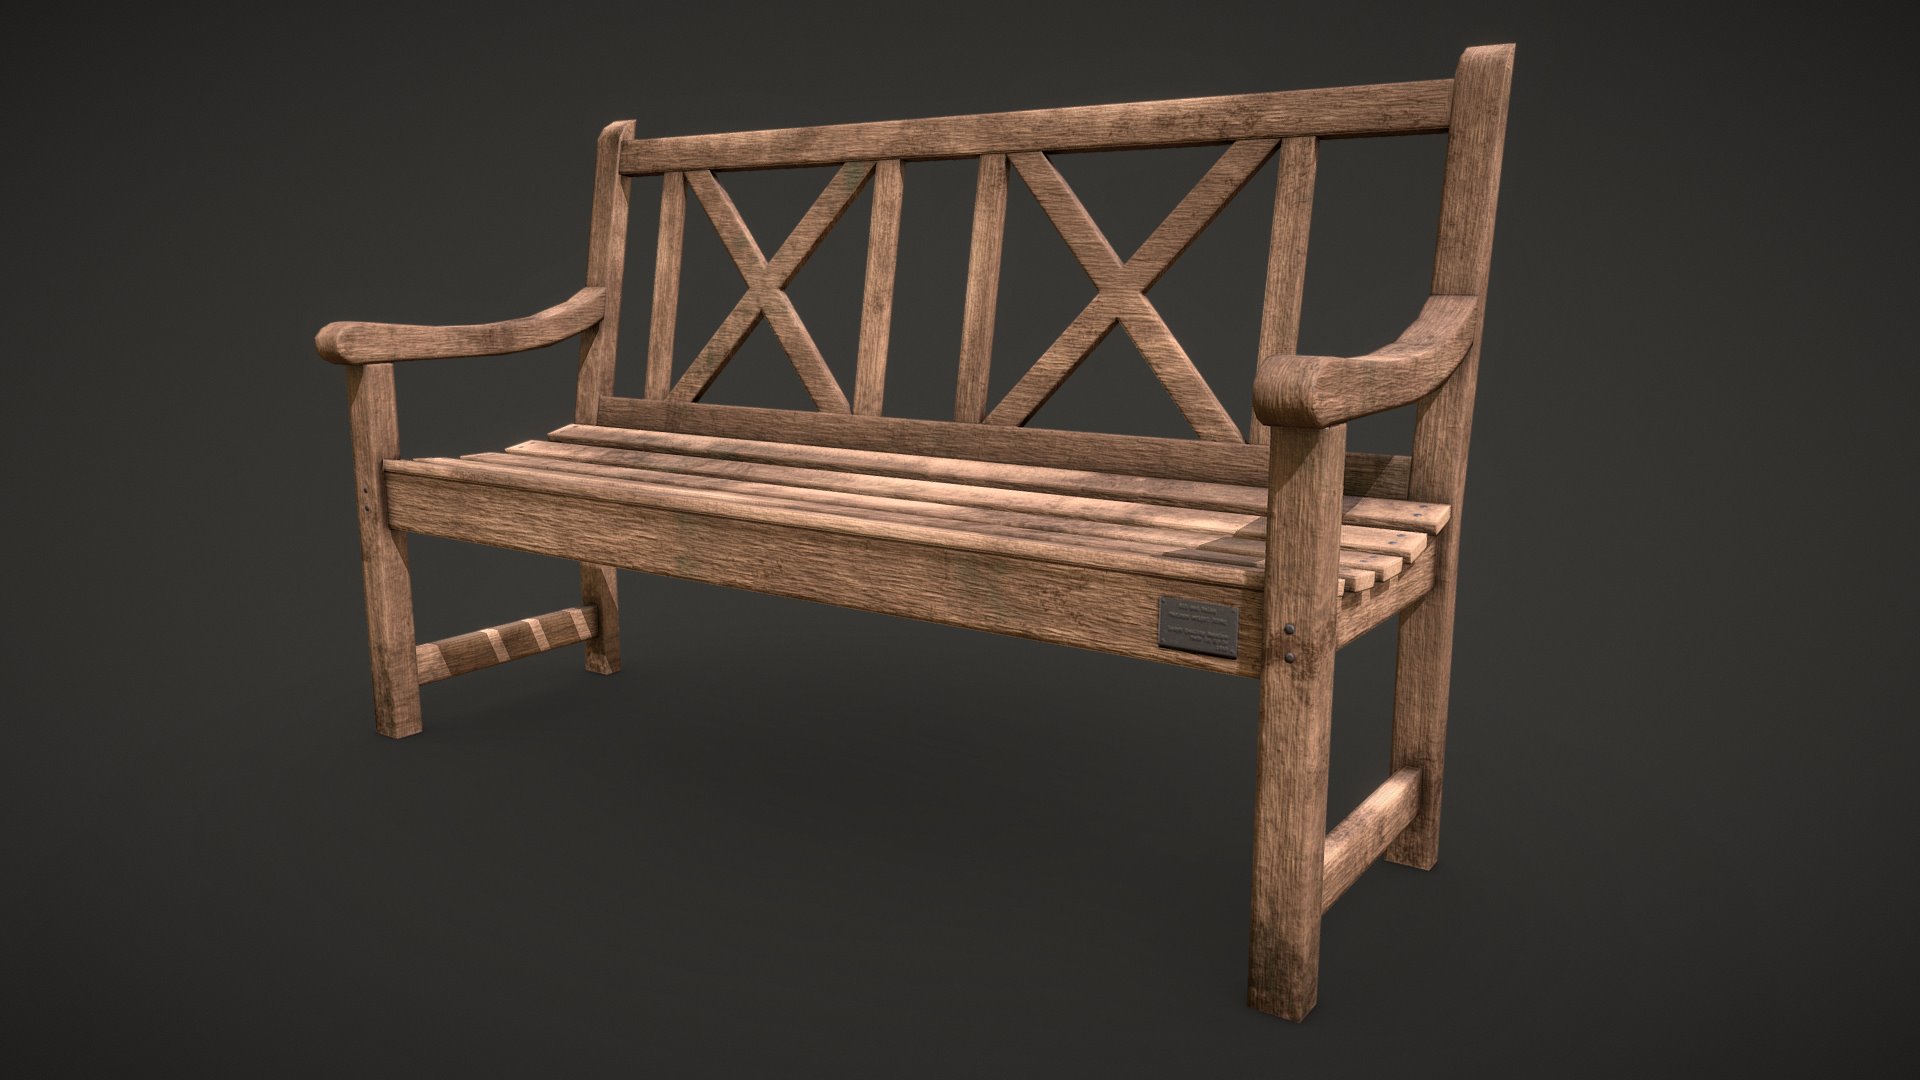 3D model Wooden Bench – Low Poly - This is a 3D model of the Wooden Bench - Low Poly. The 3D model is about a wooden chair with a metal frame.